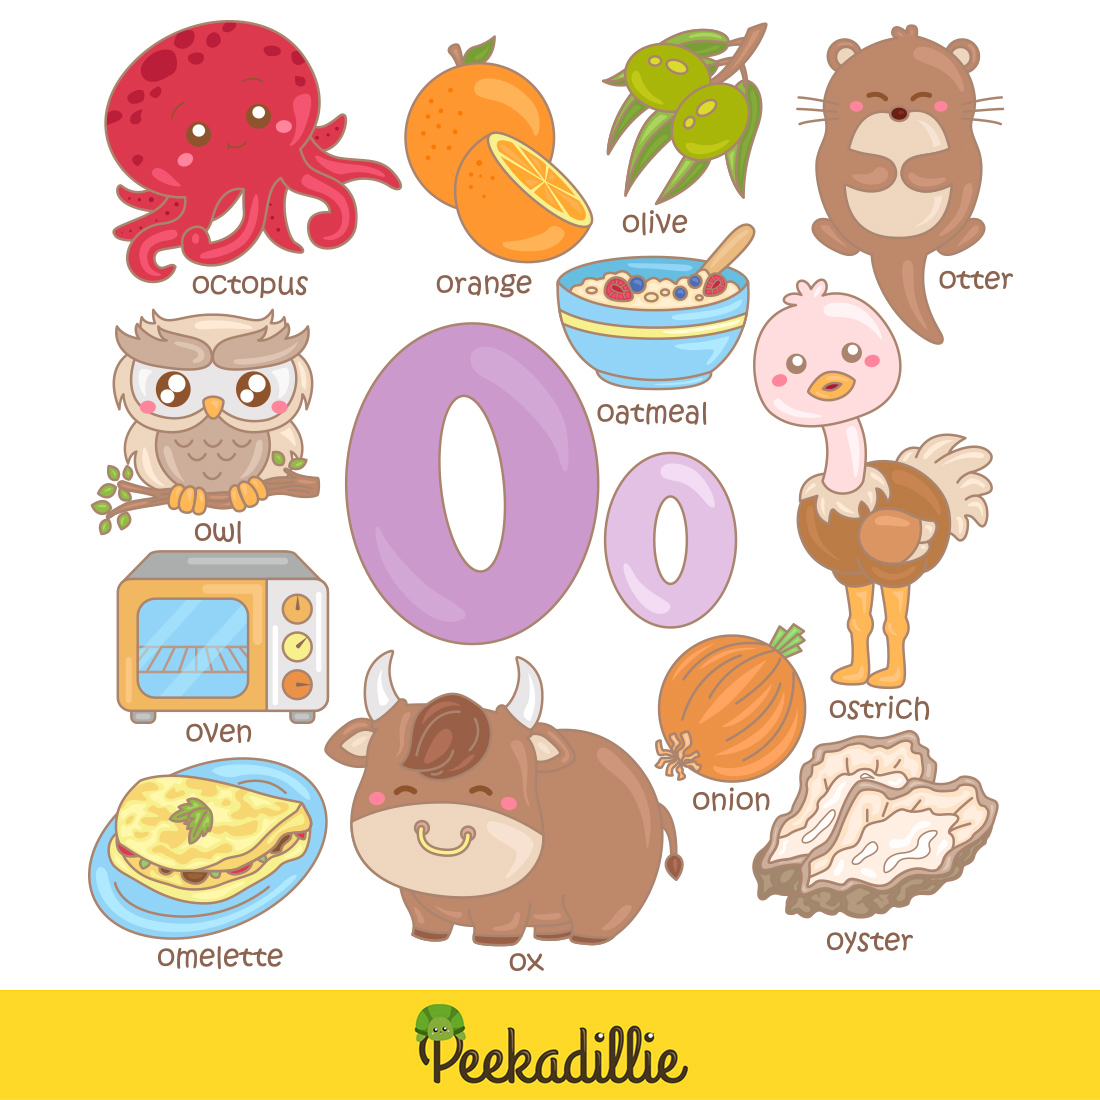 Alphabet O For Vocabulary School Letter Reading Writing Font Study Learning Student Toodler Kids Cartoon Orange Octopus Owl Oven Ox Olive Otter Oyster Onion Oatmeal Ostrich Omelette Illustration Vector Clipart preview image.